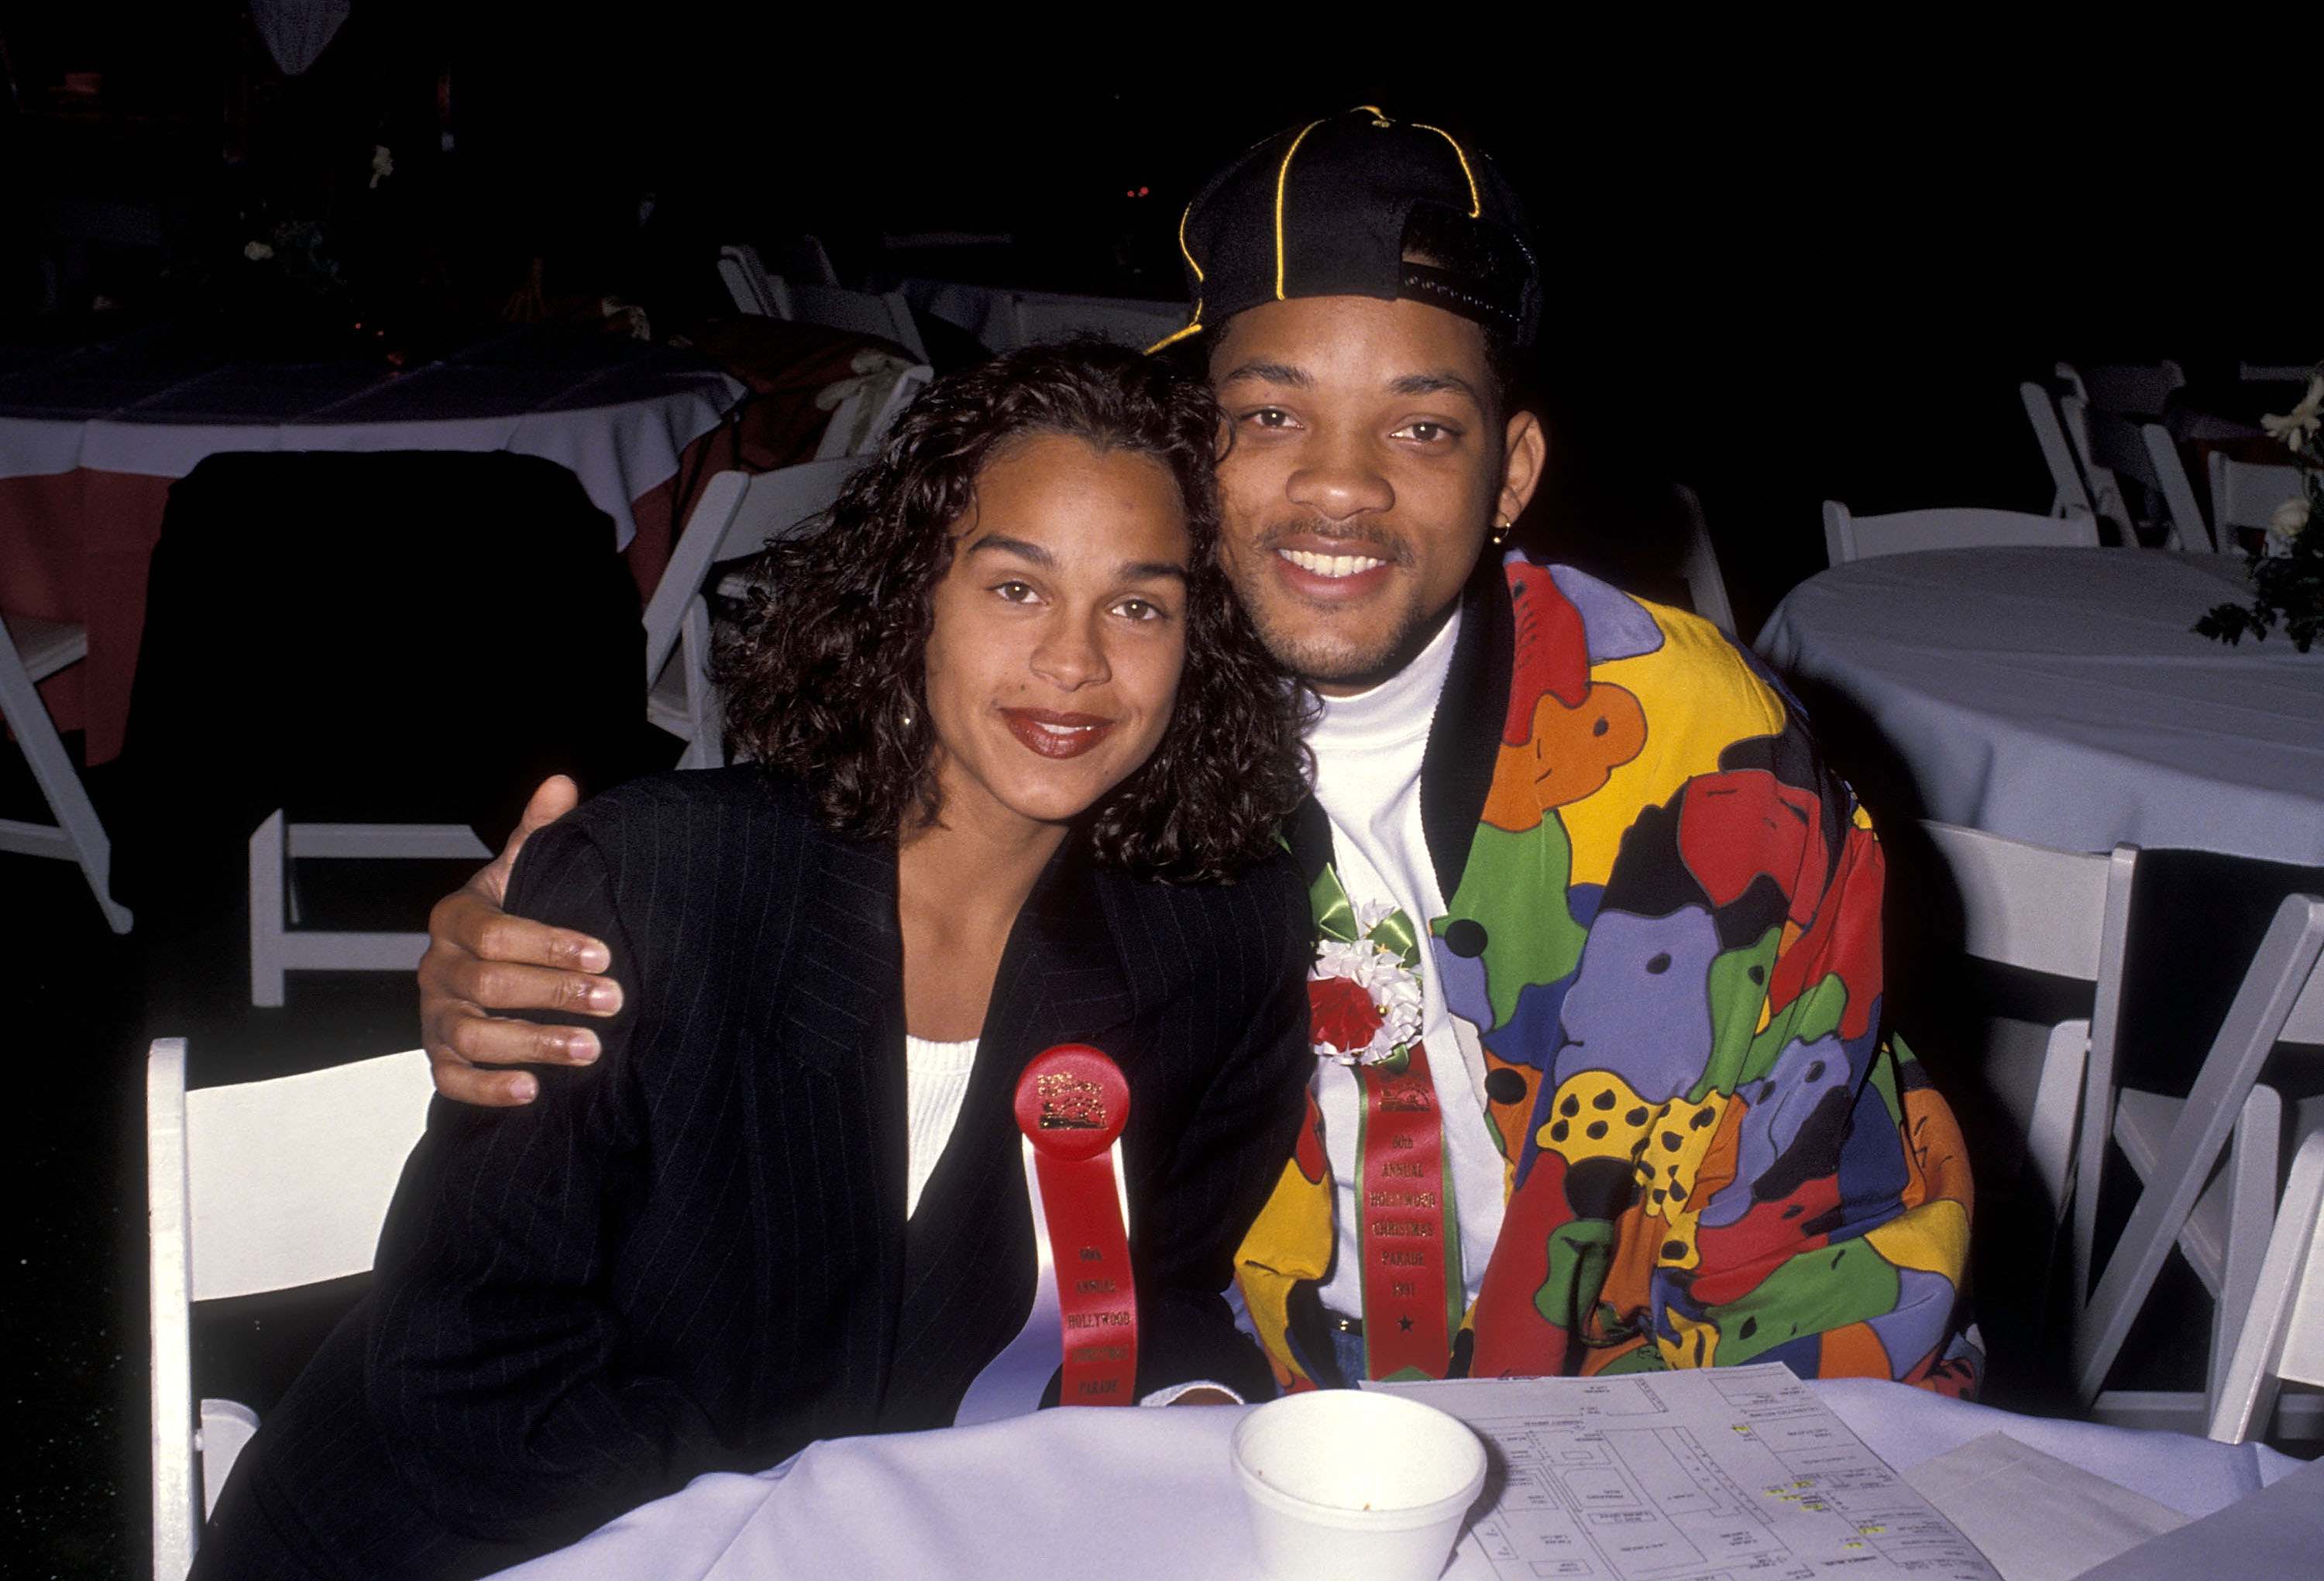 Will Smith's first wife Sheree Zampino leans into him as they sit together